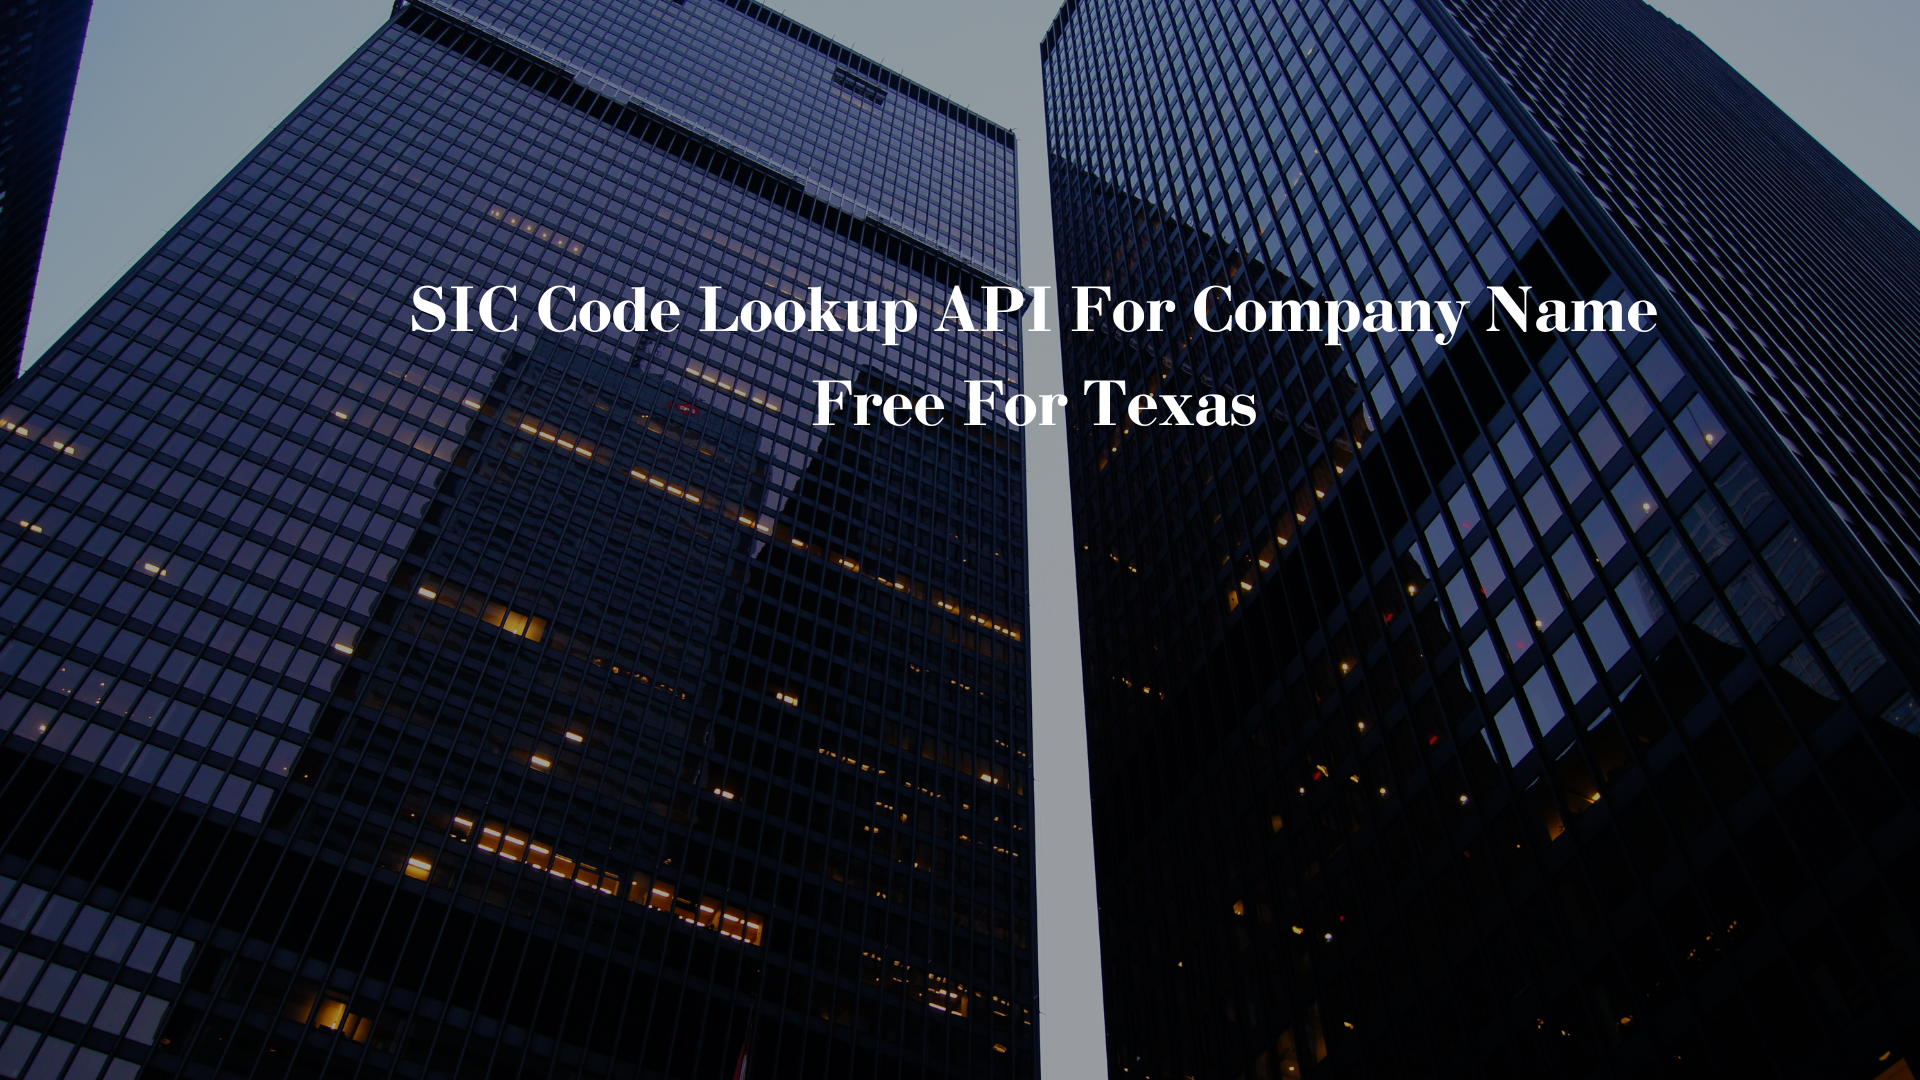 SIC Code Lookup API For Company Name Free For Texas